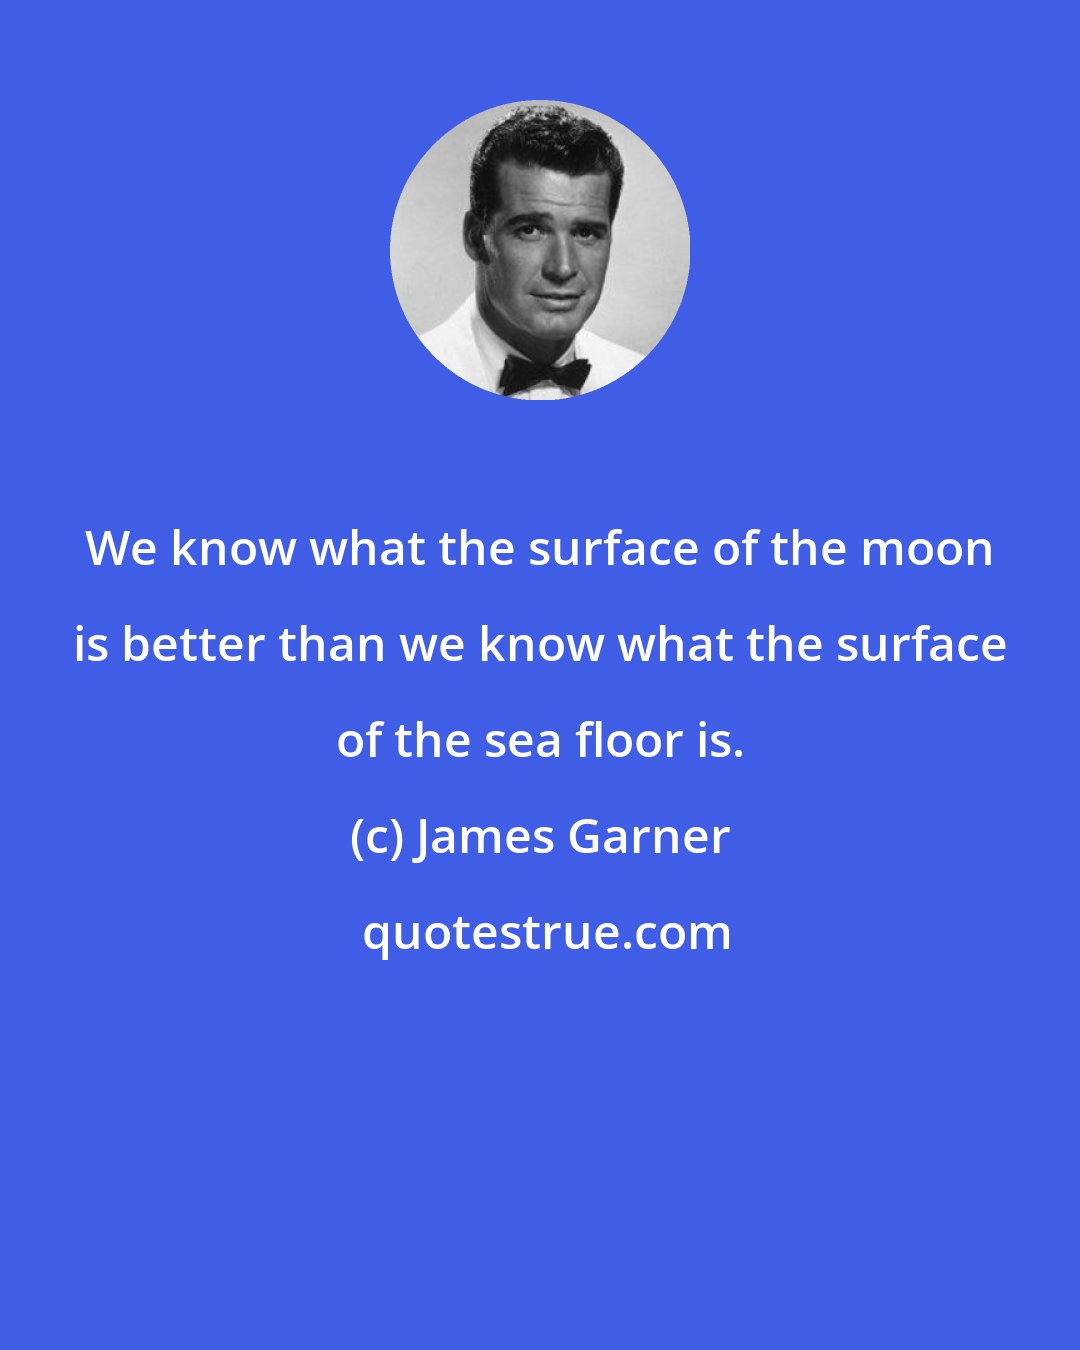 James Garner: We know what the surface of the moon is better than we know what the surface of the sea floor is.